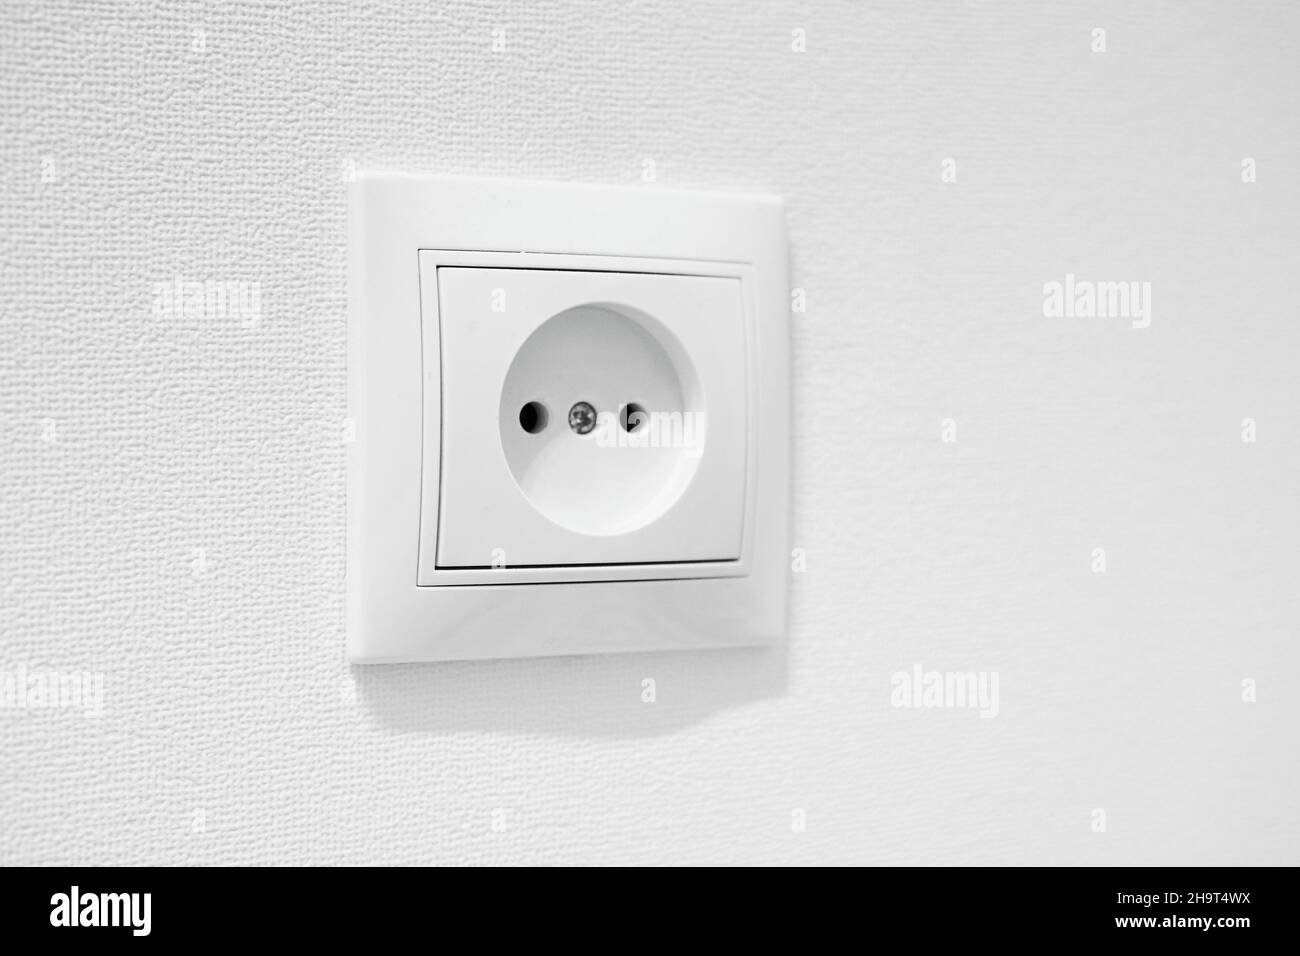 German circular recess socket with two round holes for 2 pins europlugs types C, E and F. Common cheap plastic AC power wall outlet. Not grounded Stock Photo